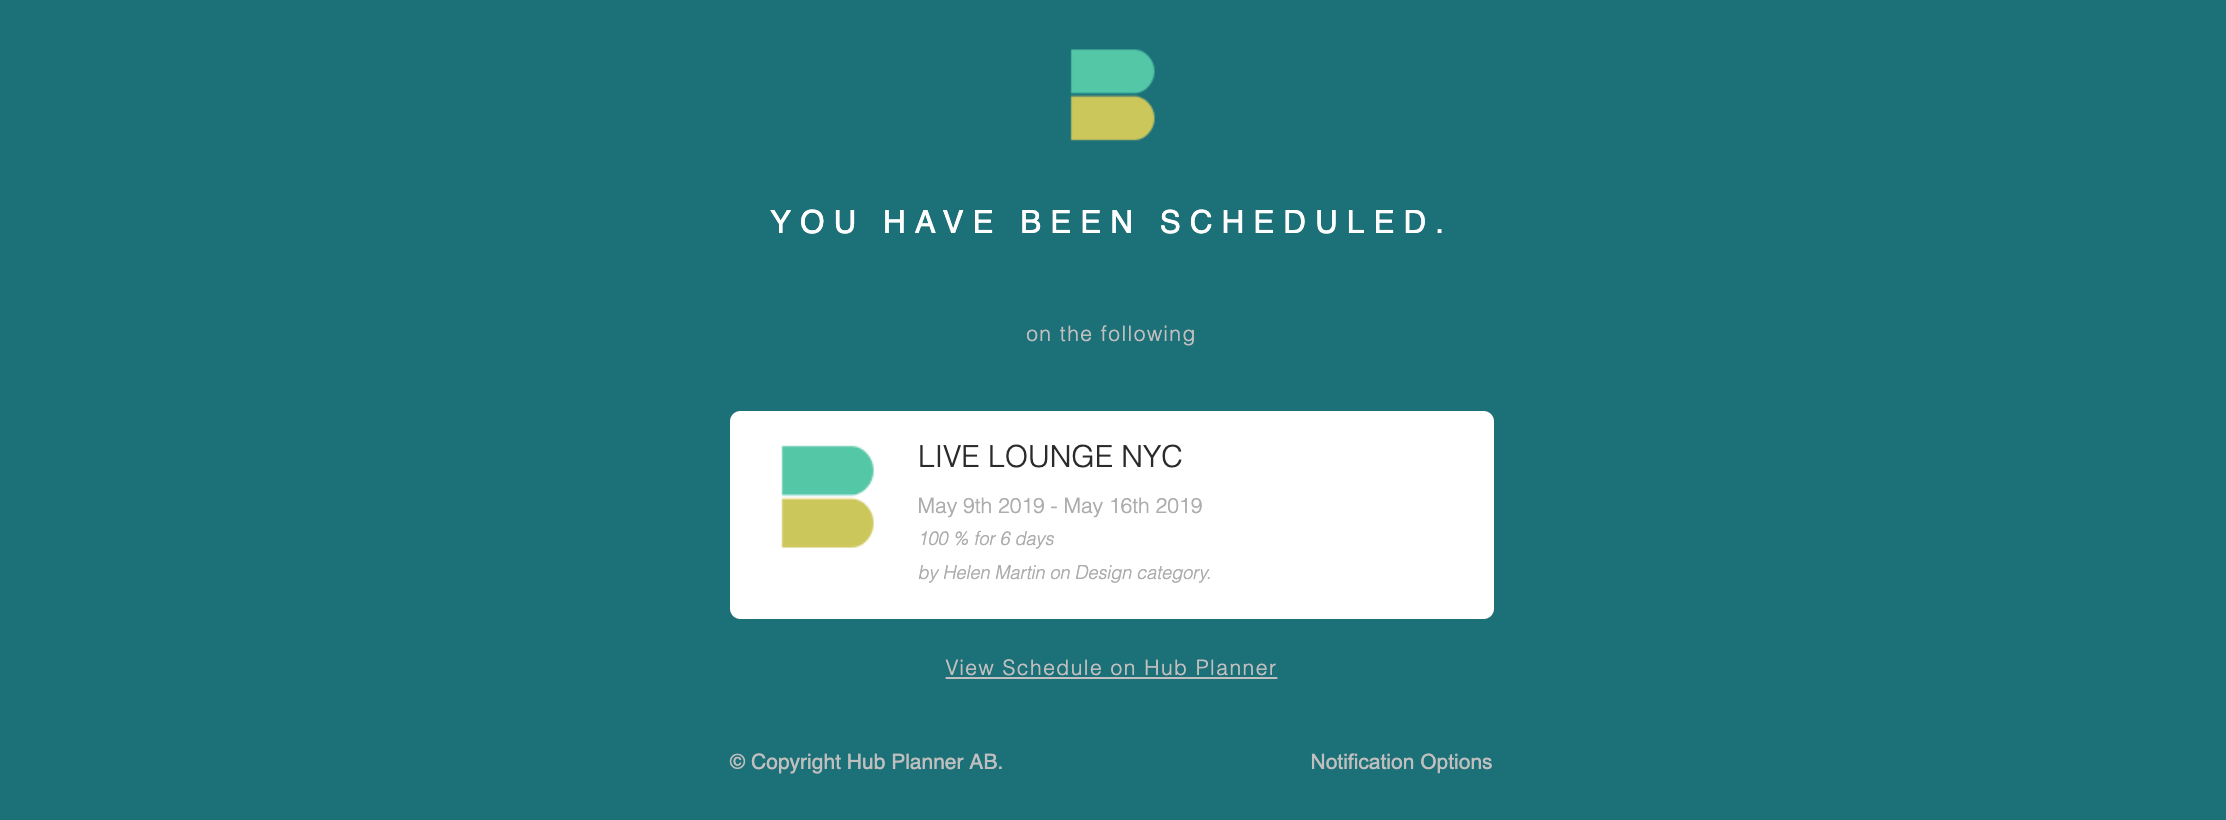 CREATED BOOKING EMAIL NOTIFICATION